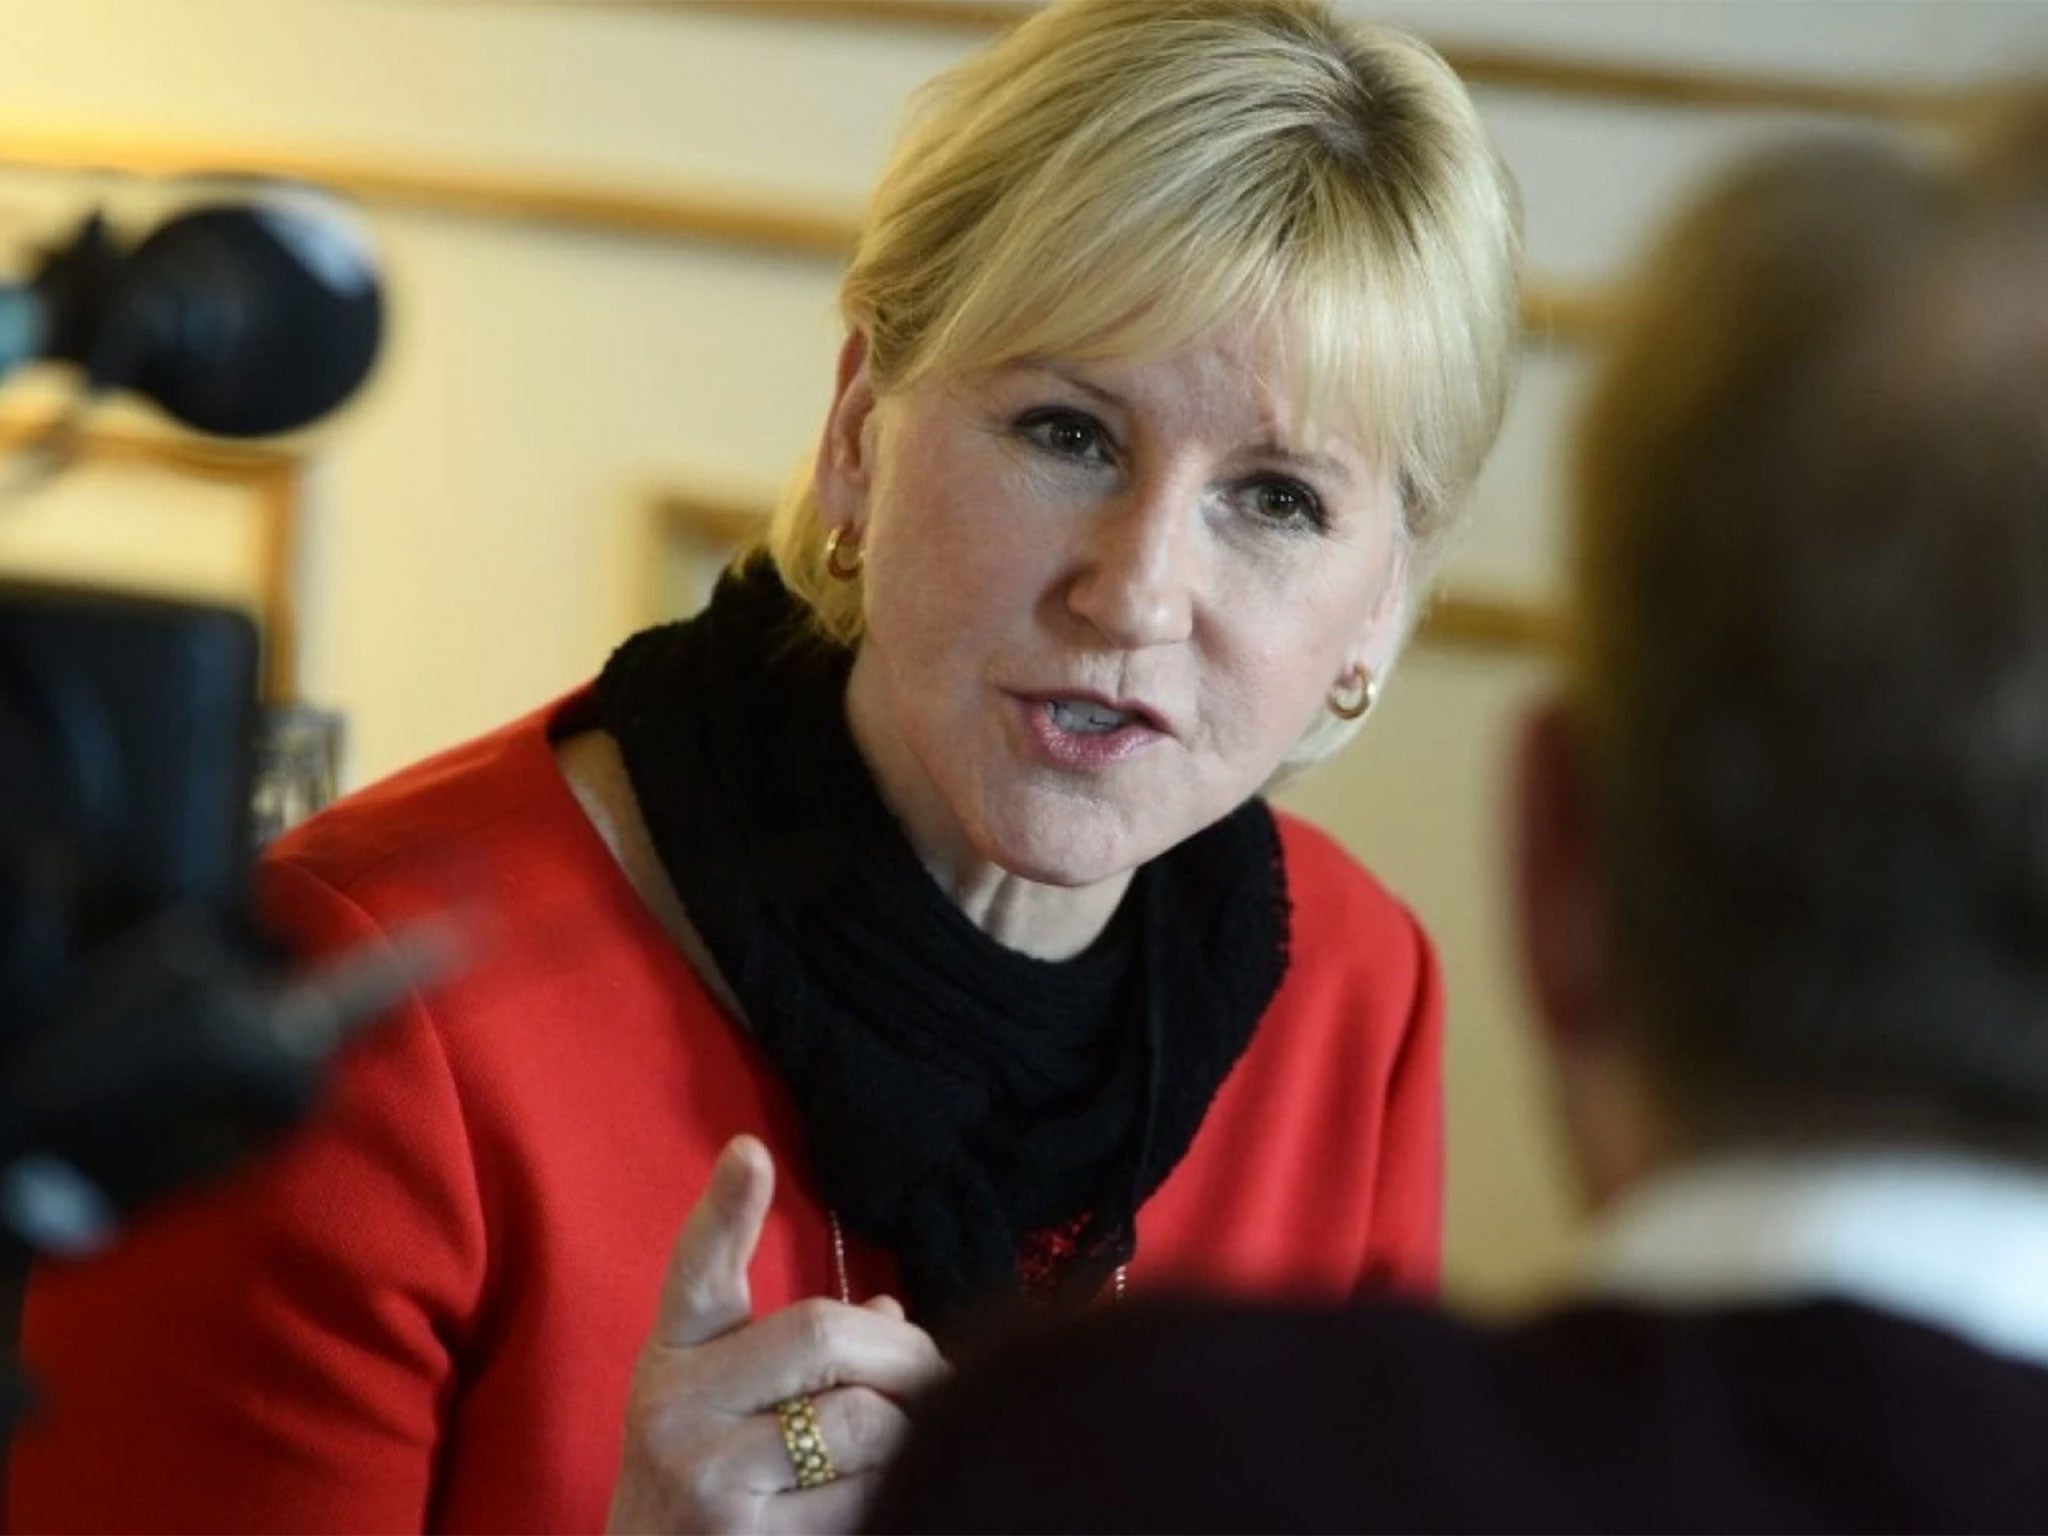 Margot Wallstrom has asked for credible investigations into the deaths of 100 Palestinians